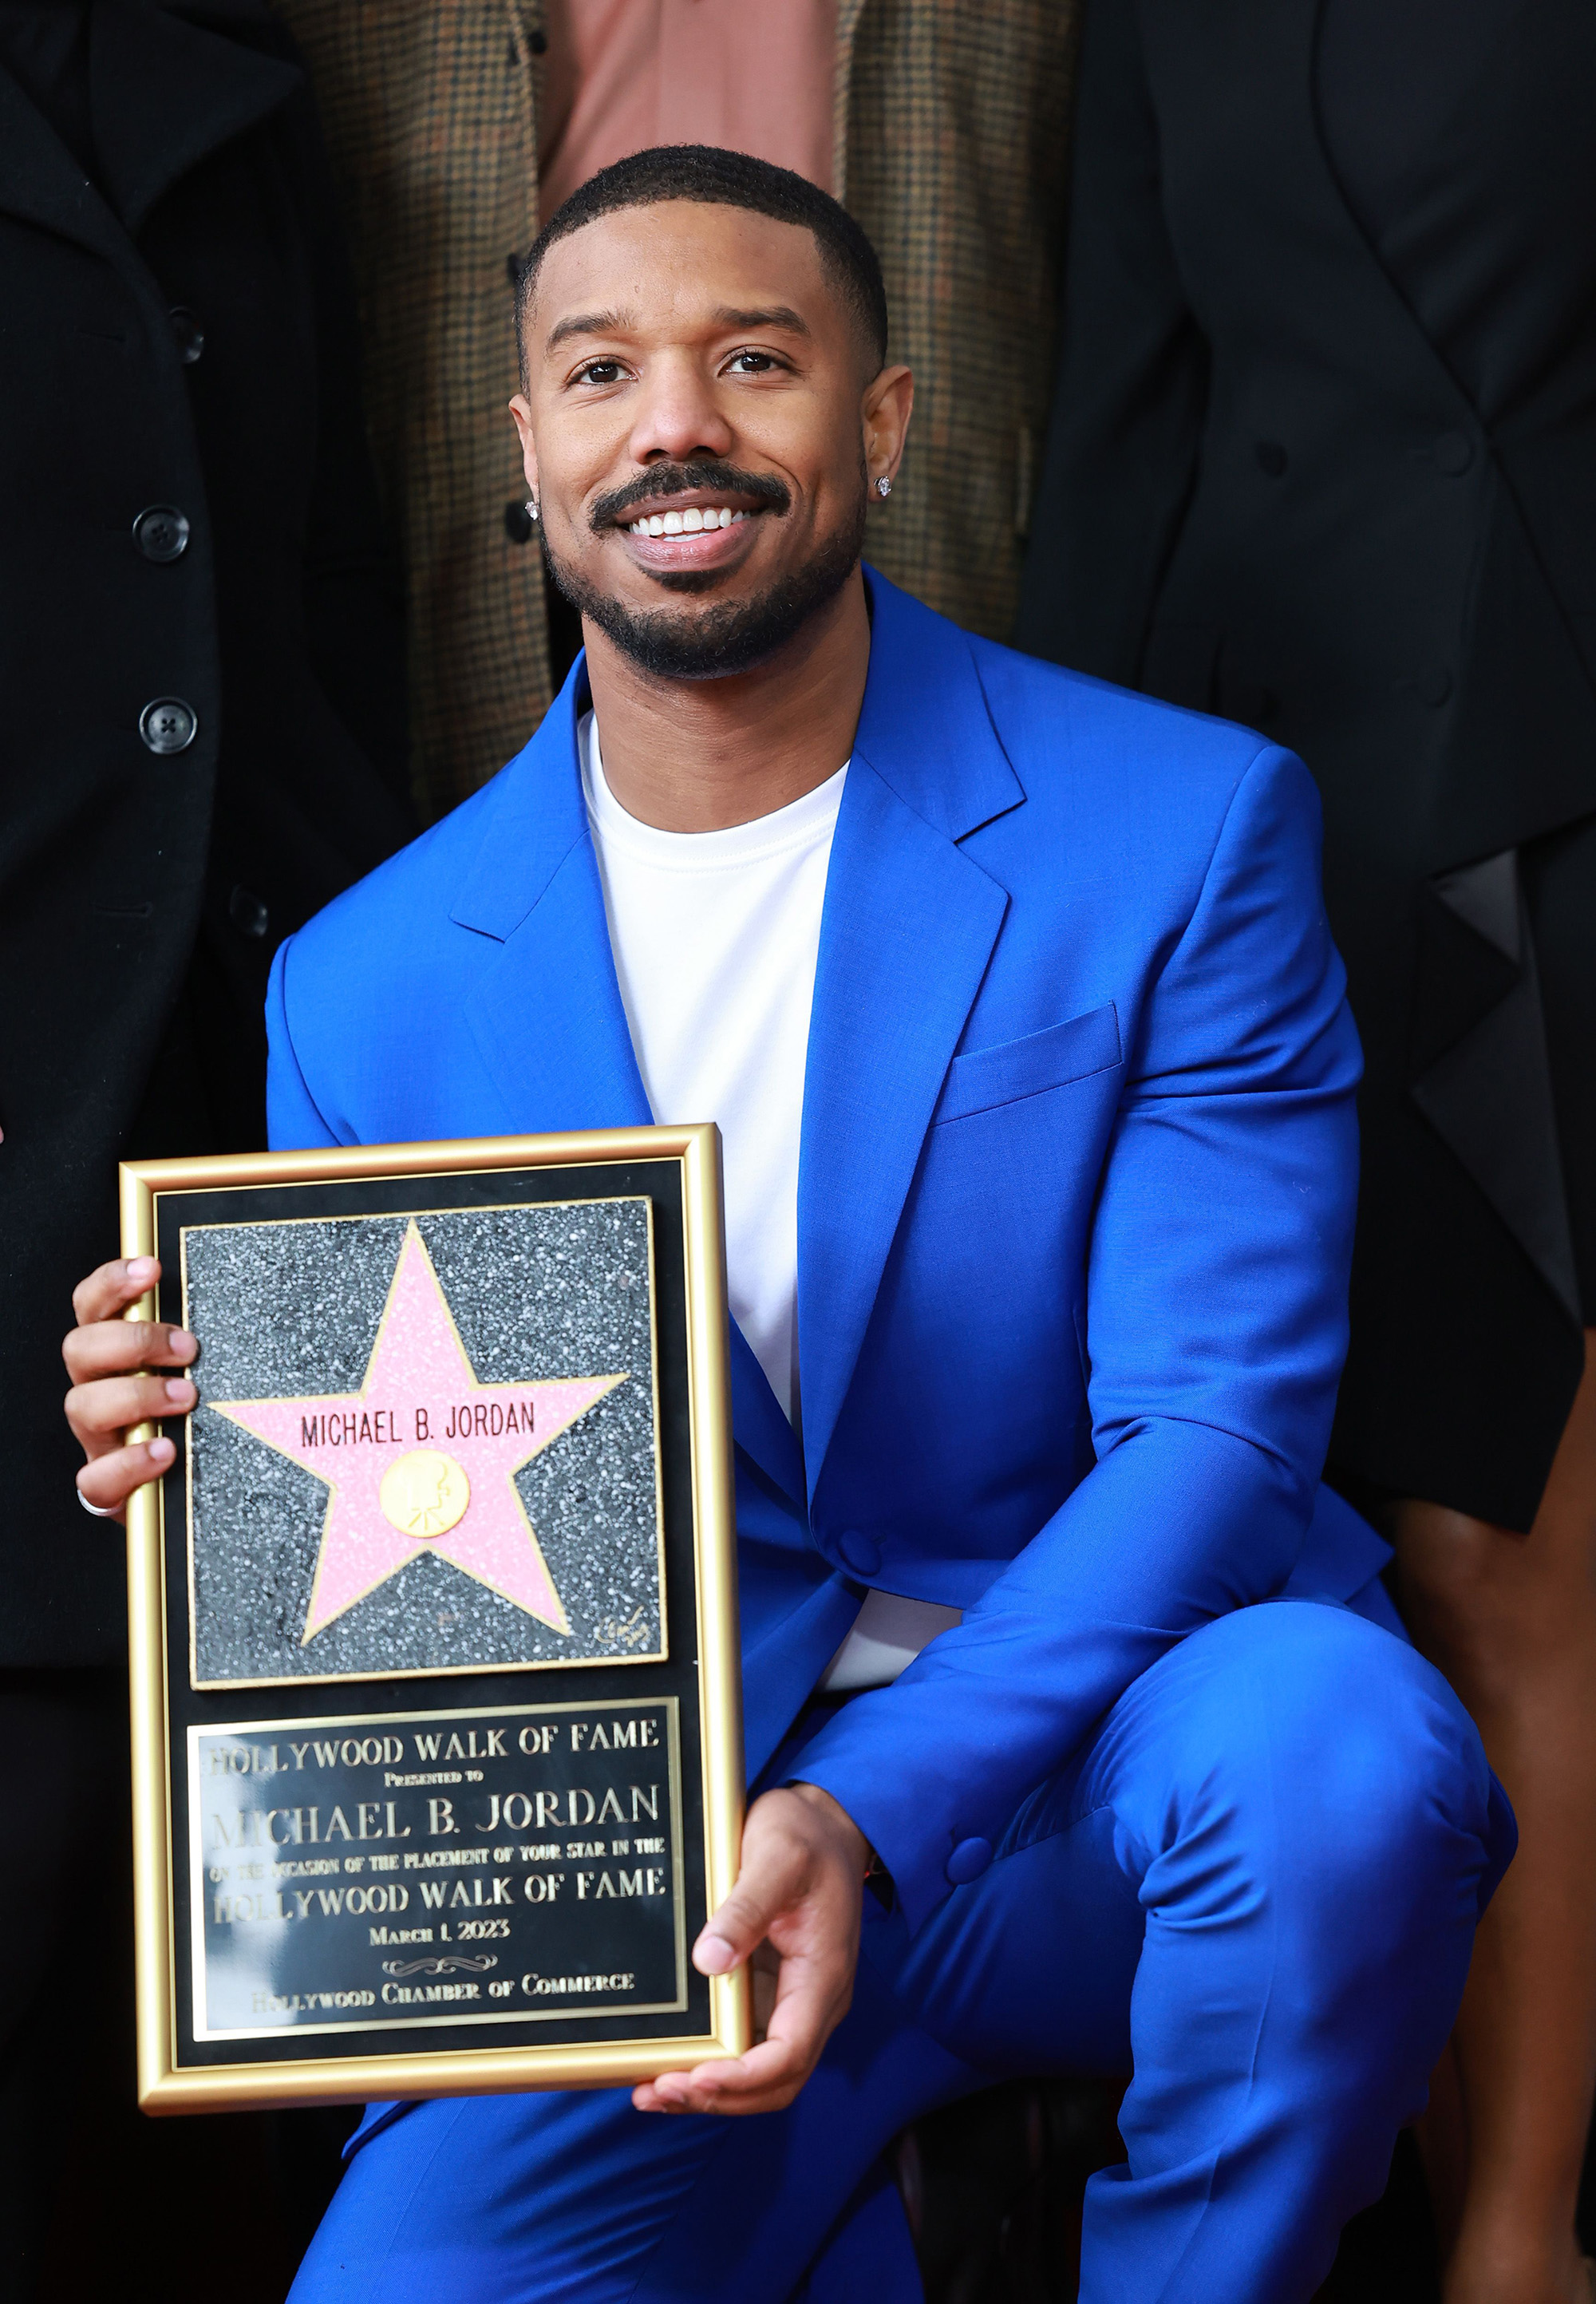 Michael B. Jordan poses for a photo during his Hollywood Walk Of Fame Star Ceremony on March 01, 2023, in Hollywood, Calif.